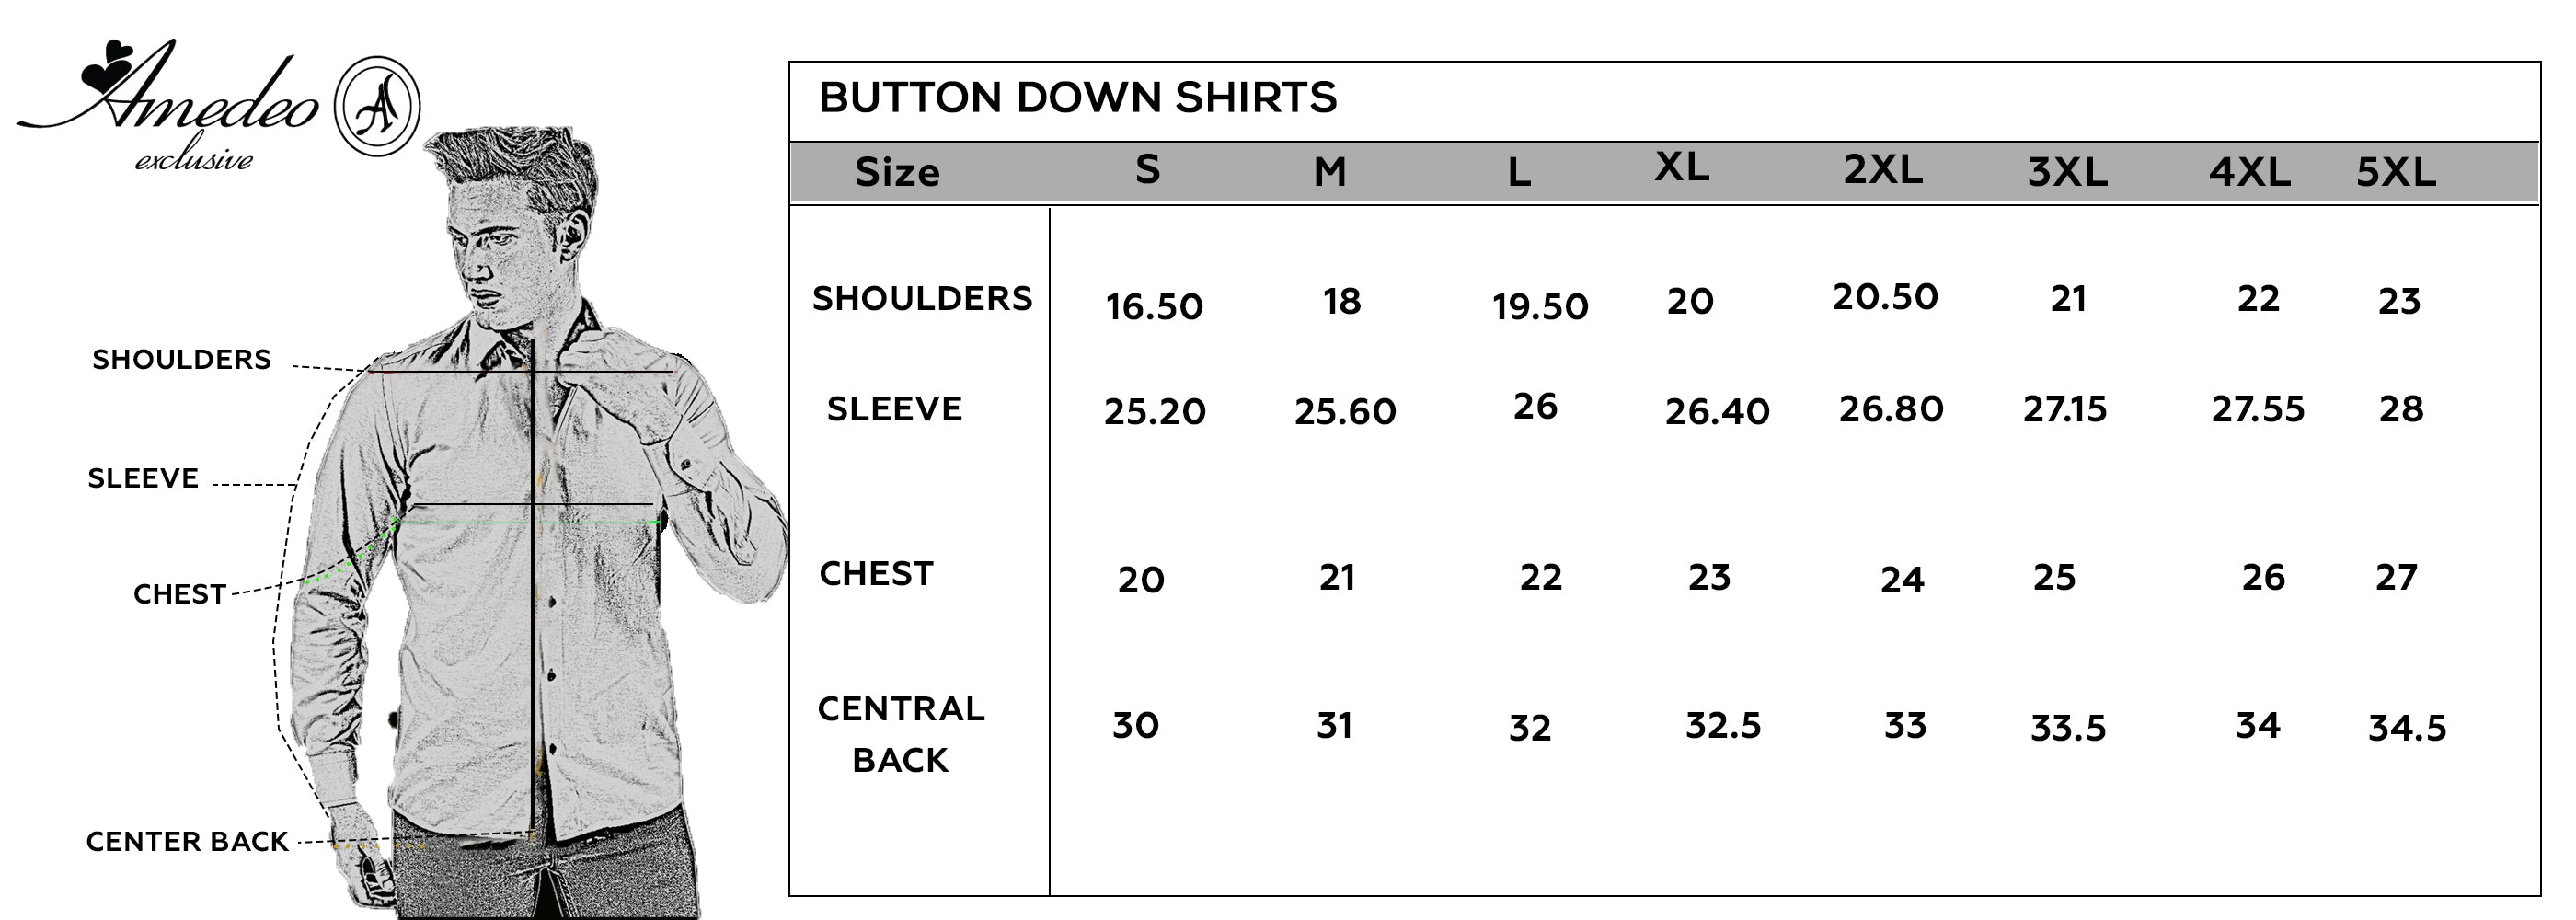 White Mens Slim Fit Designer Dress Shirt - Tailored Cotton Shirts For Work And Casual